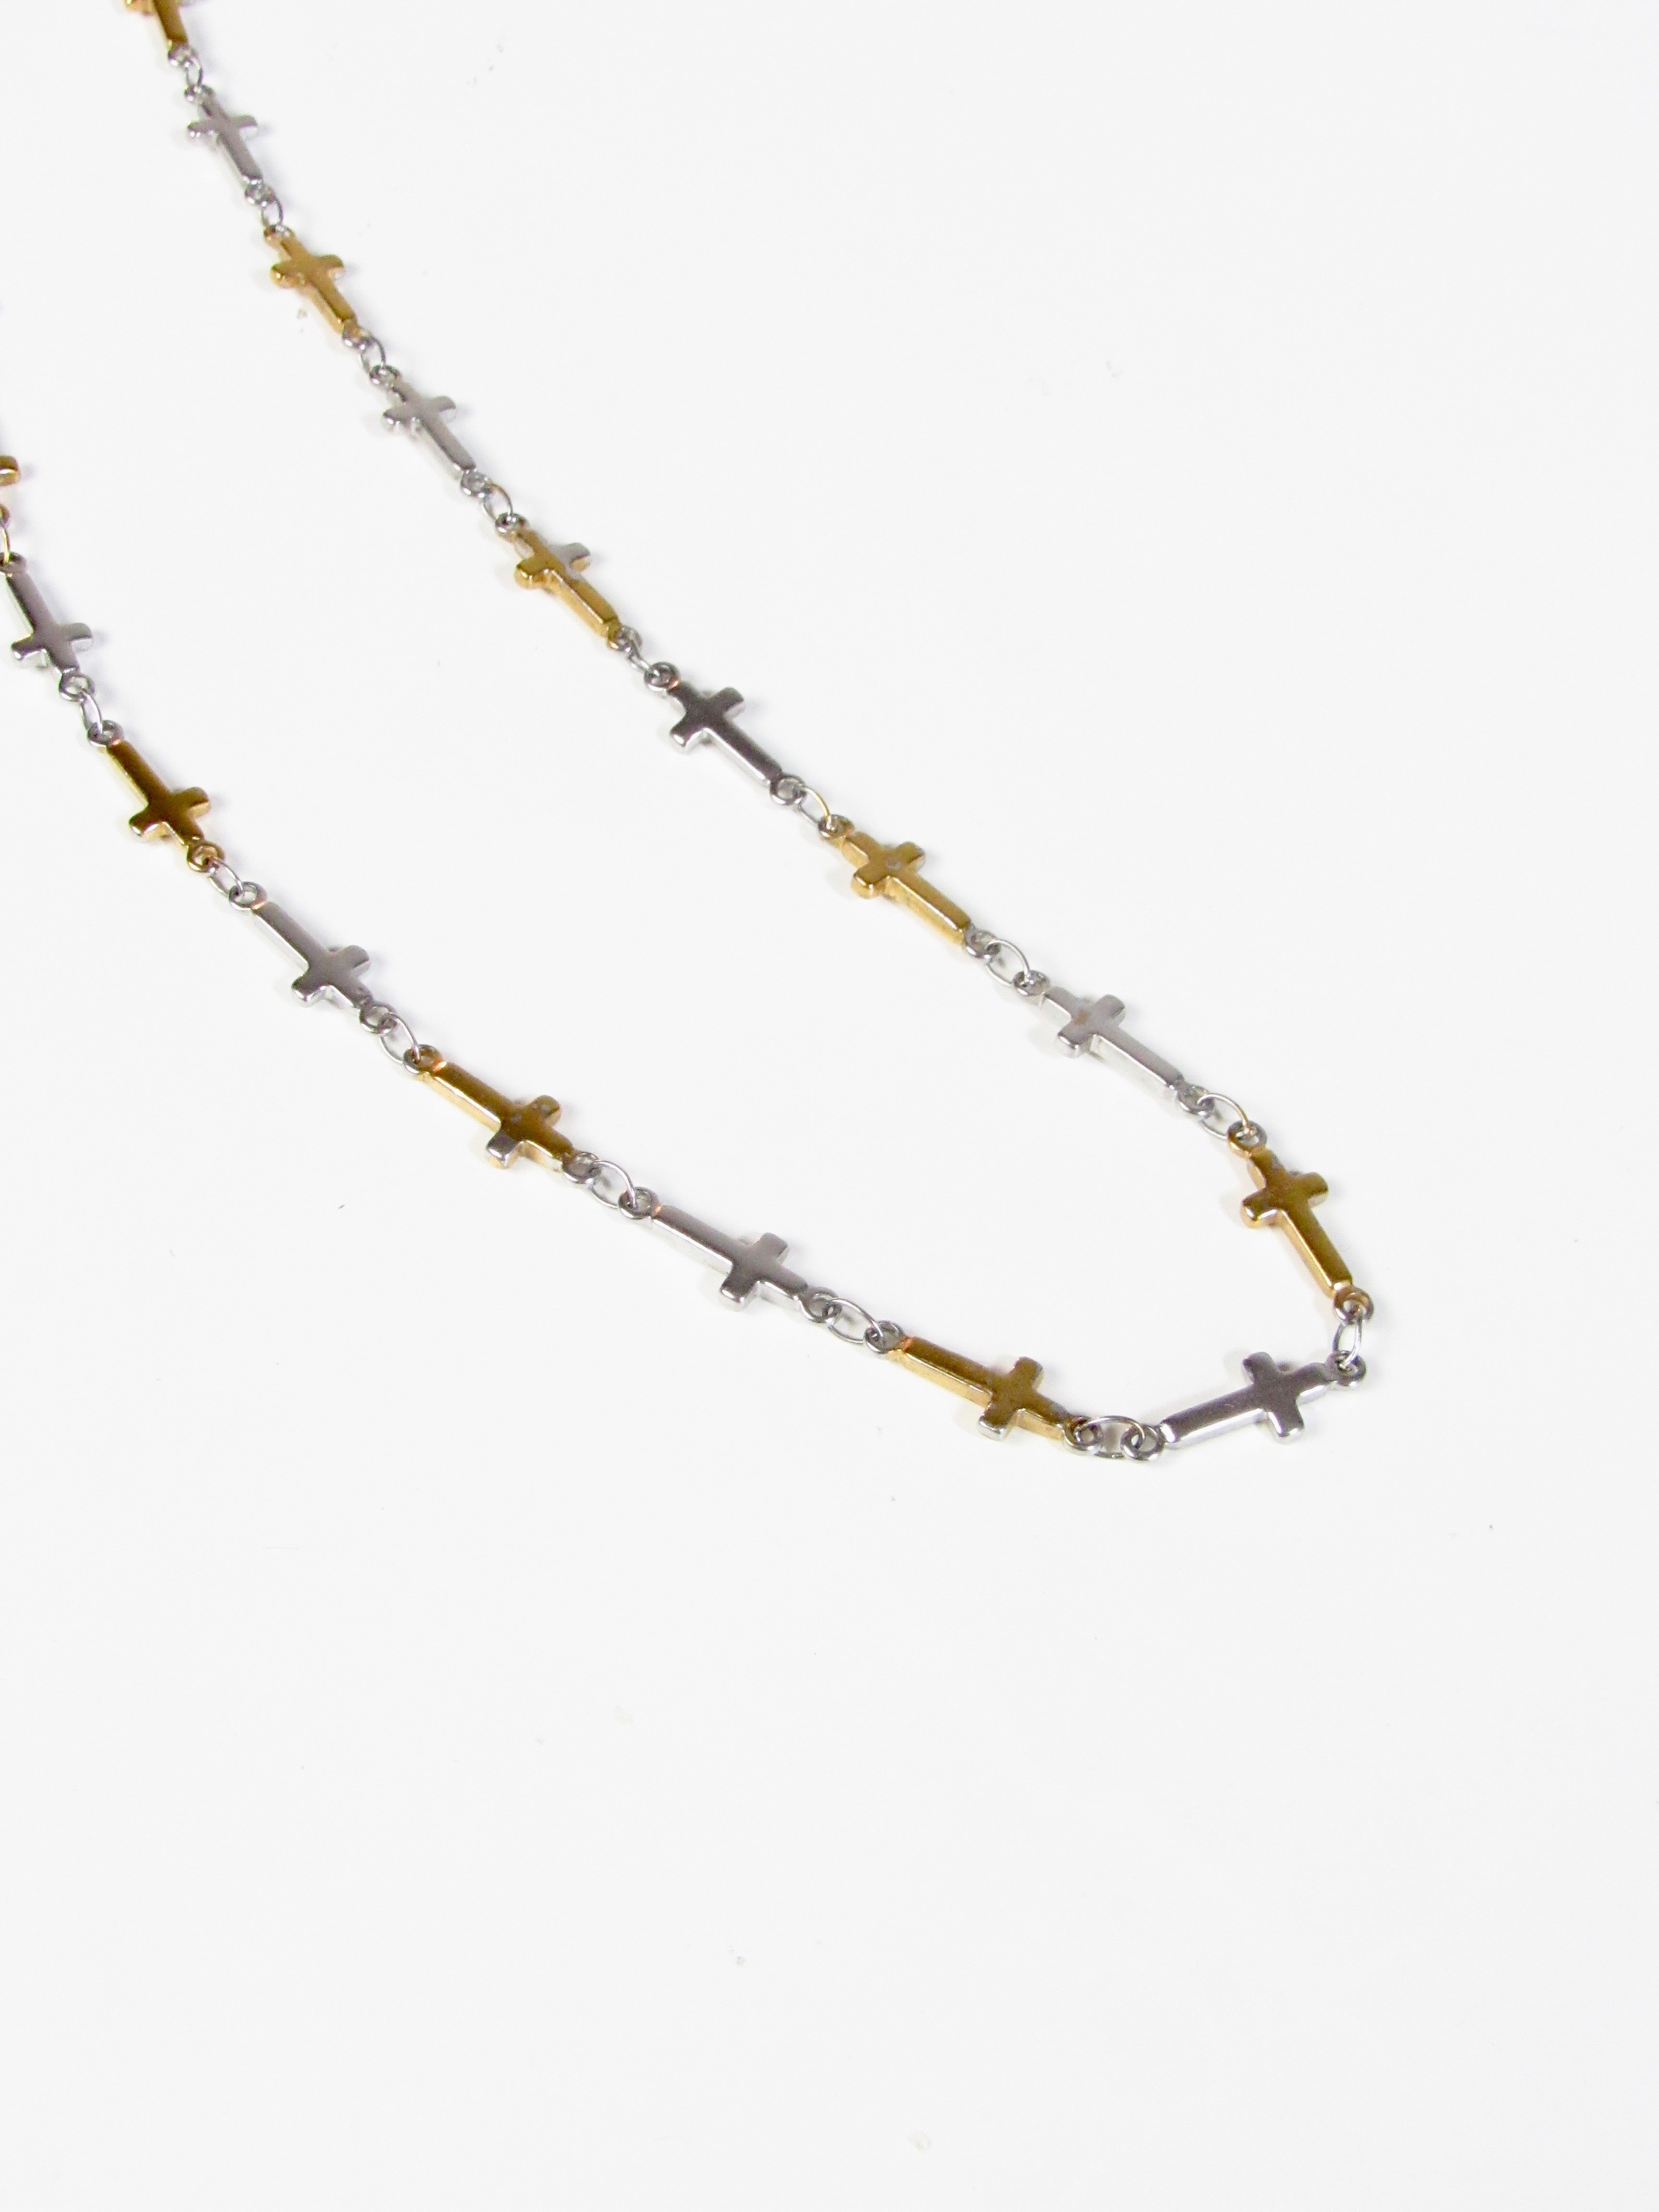 Tattoo Cross Alternated Gold & Silver Chain Necklace